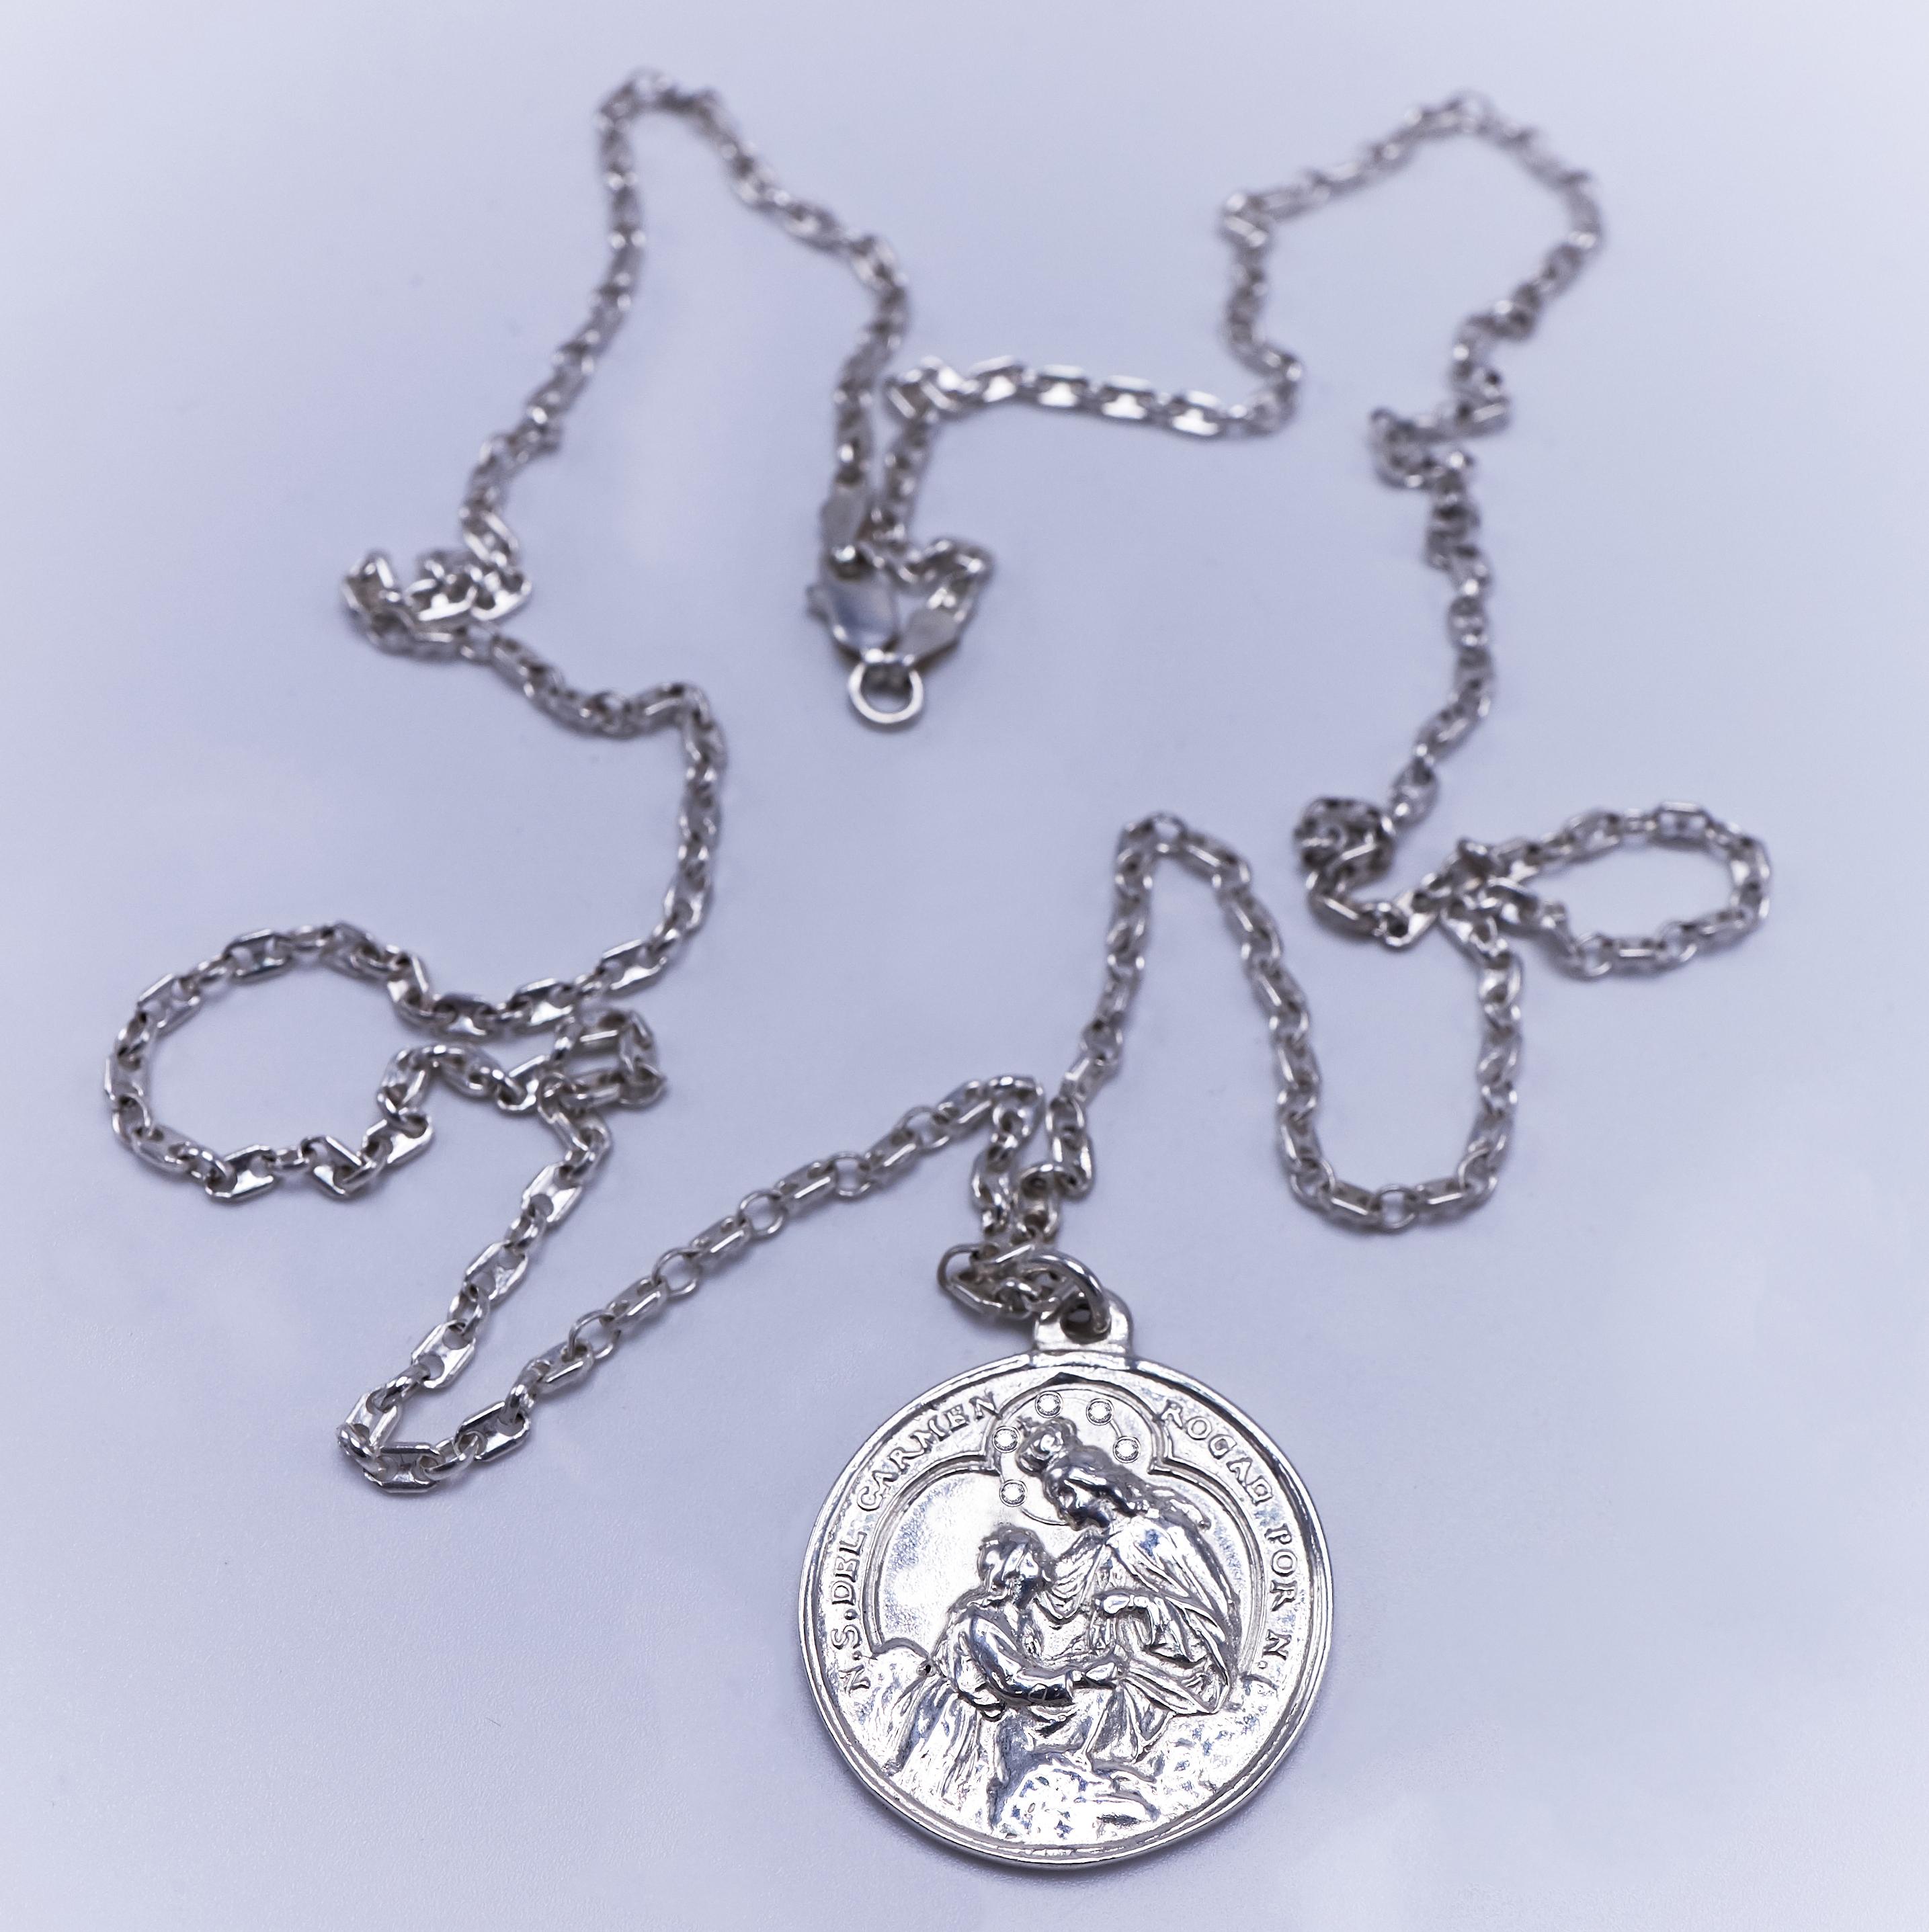 Medal Chain Necklace Miraculous Virgin Mary White Diamond Silver J Dauphin

J DAUPHIN necklace 